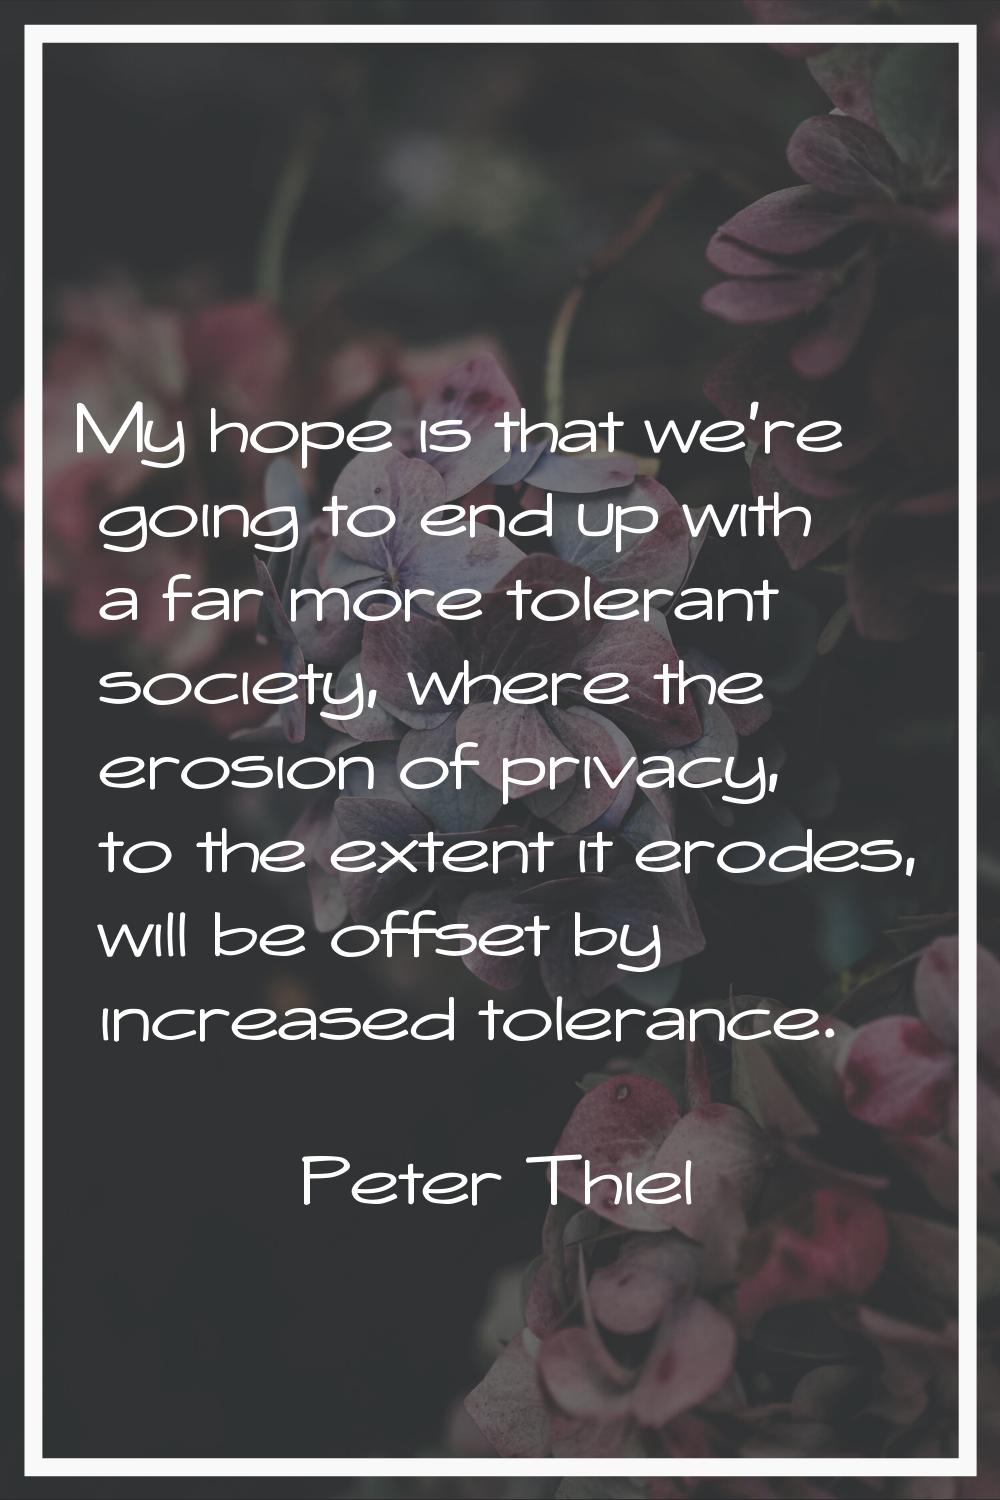 My hope is that we're going to end up with a far more tolerant society, where the erosion of privac